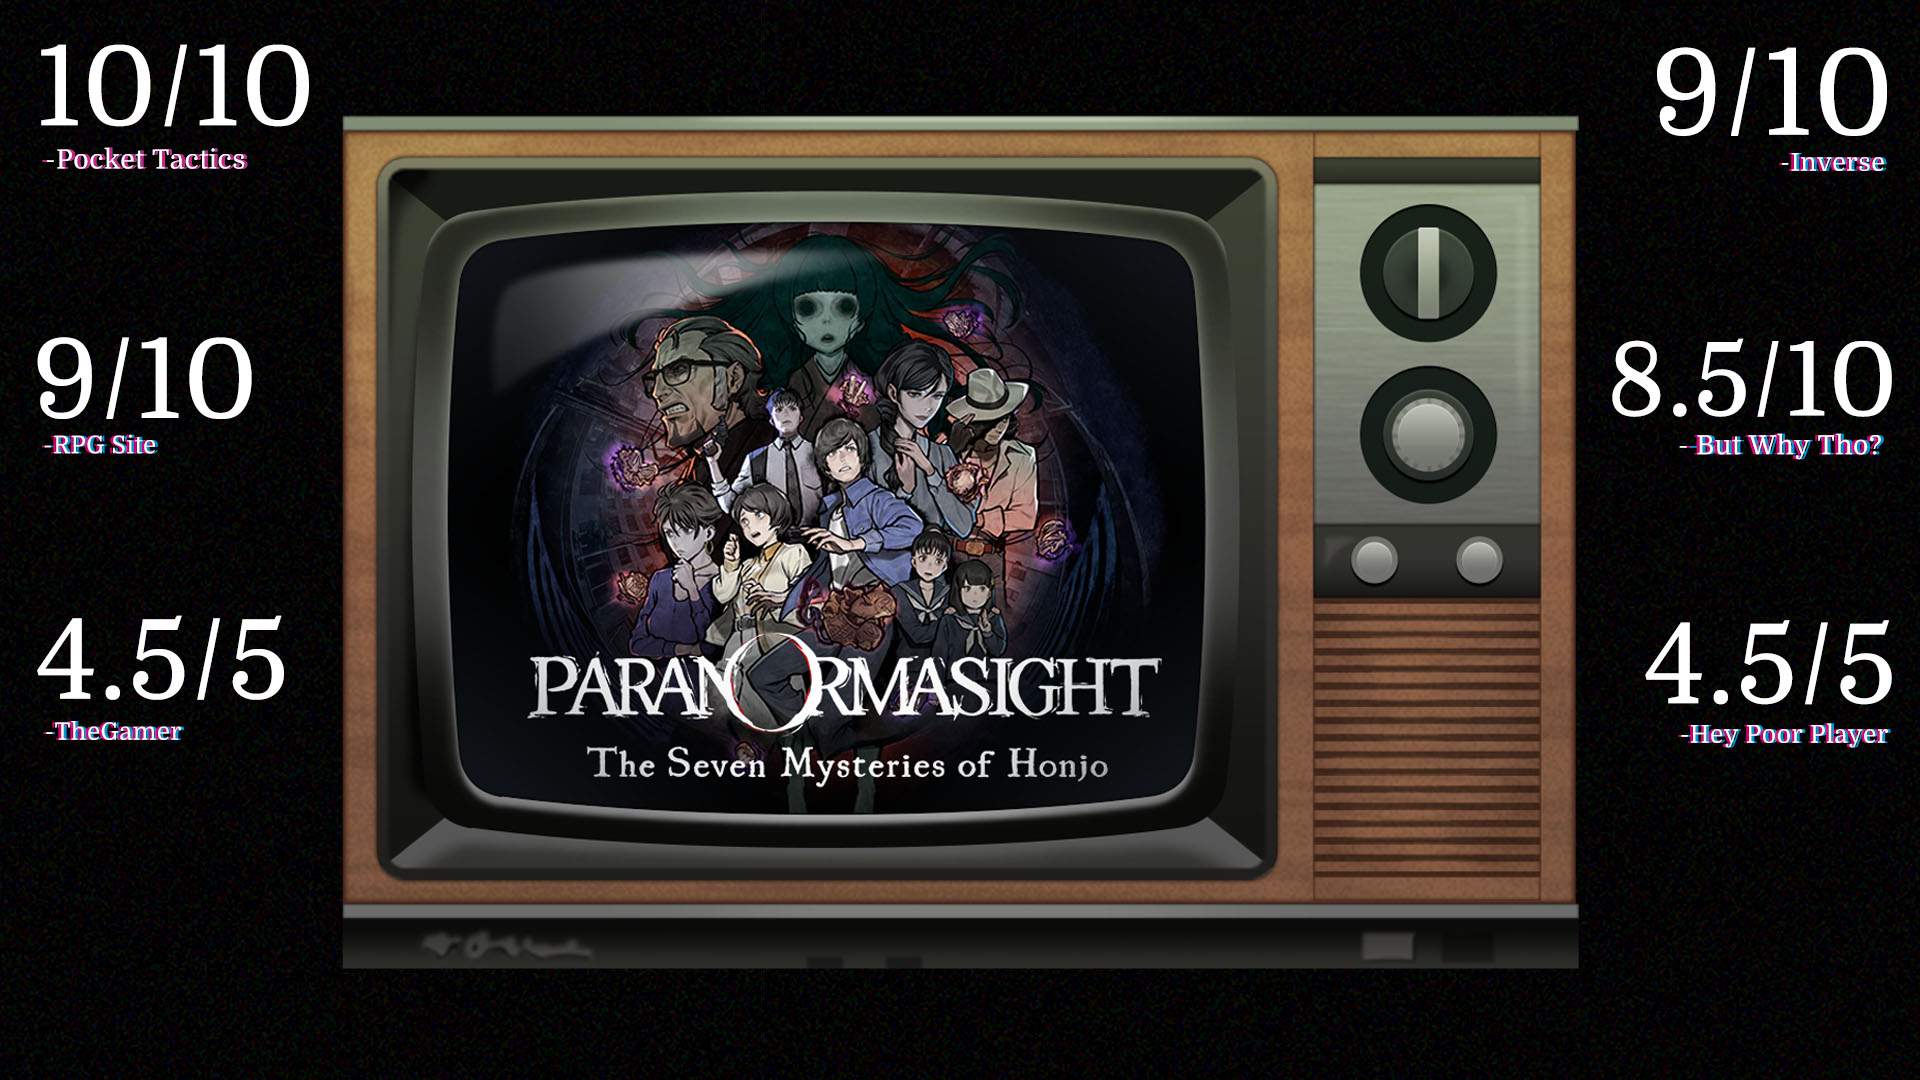 A TV set showing characters from PARANORMASIGHT, surrounded by reviewer quotes.